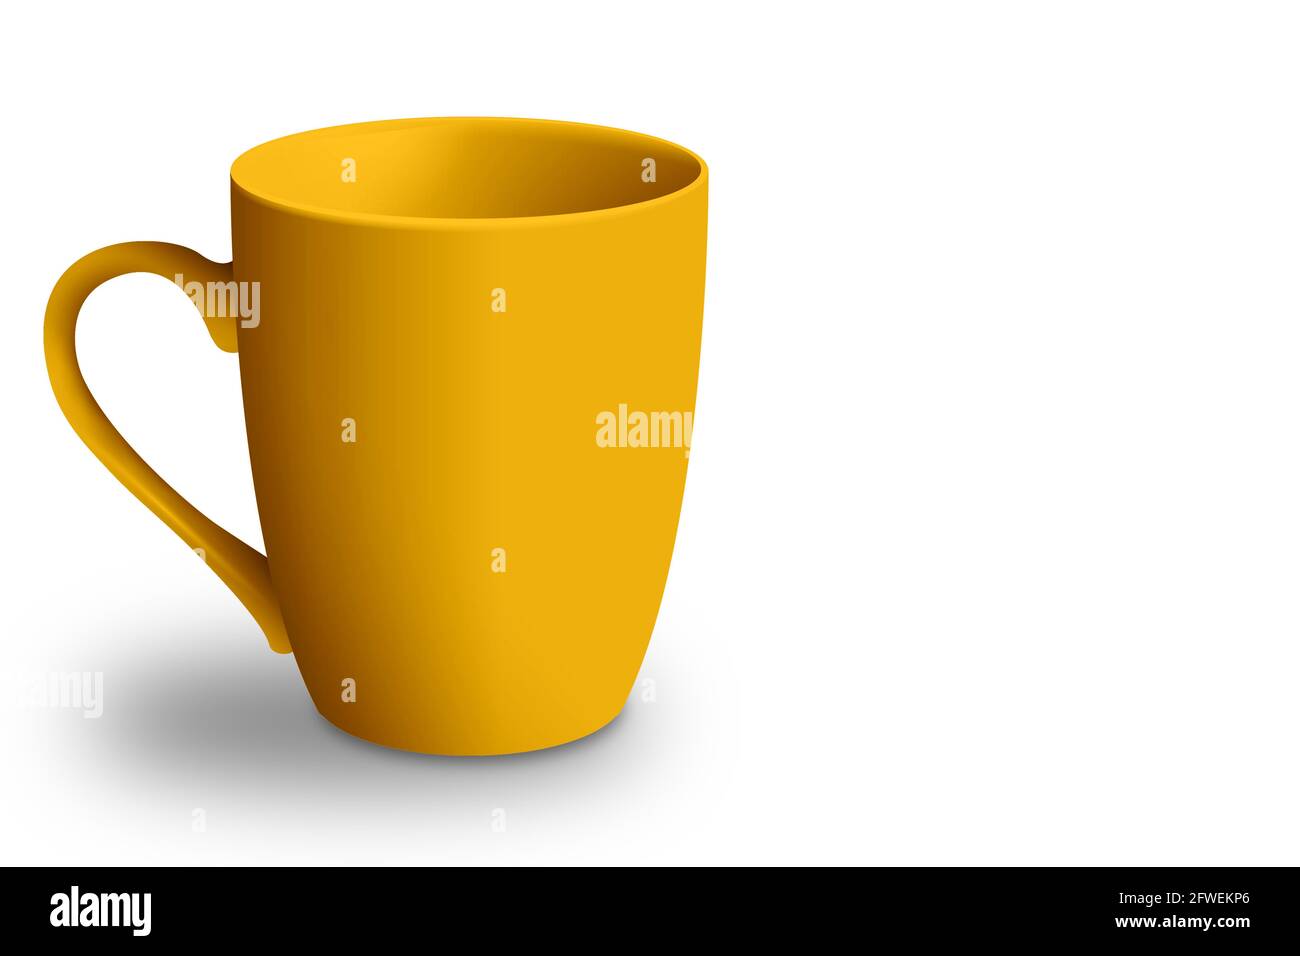 White Mug Cup Mockup For Your Design Isolated On White Background